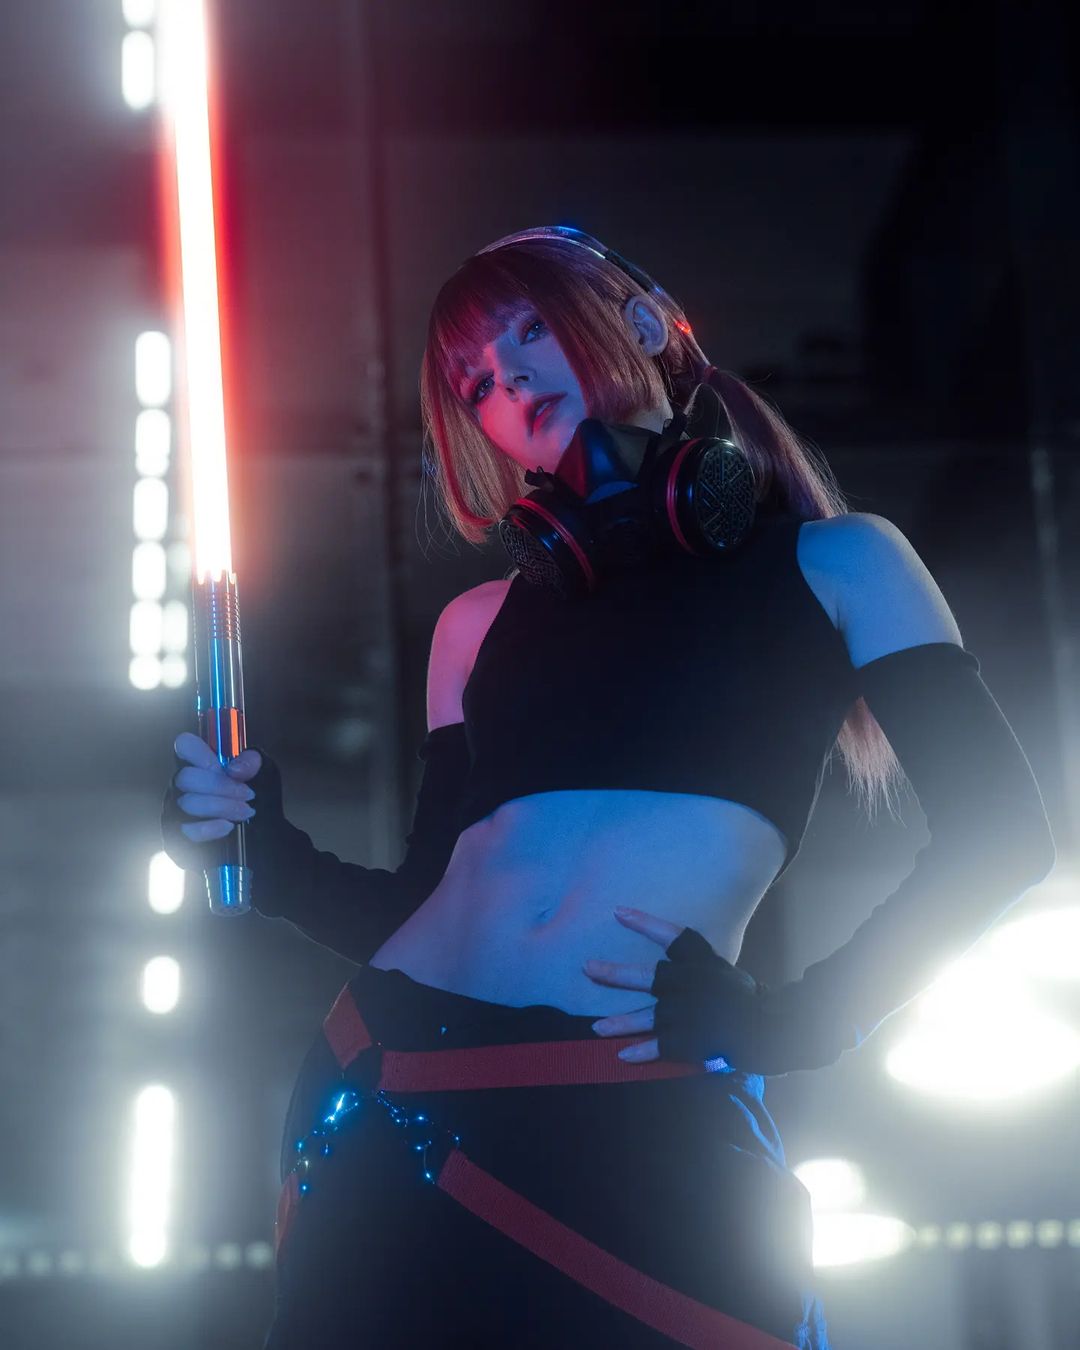 Detailed Introduction To Multiple Versions of DamienSaber Lightsabers